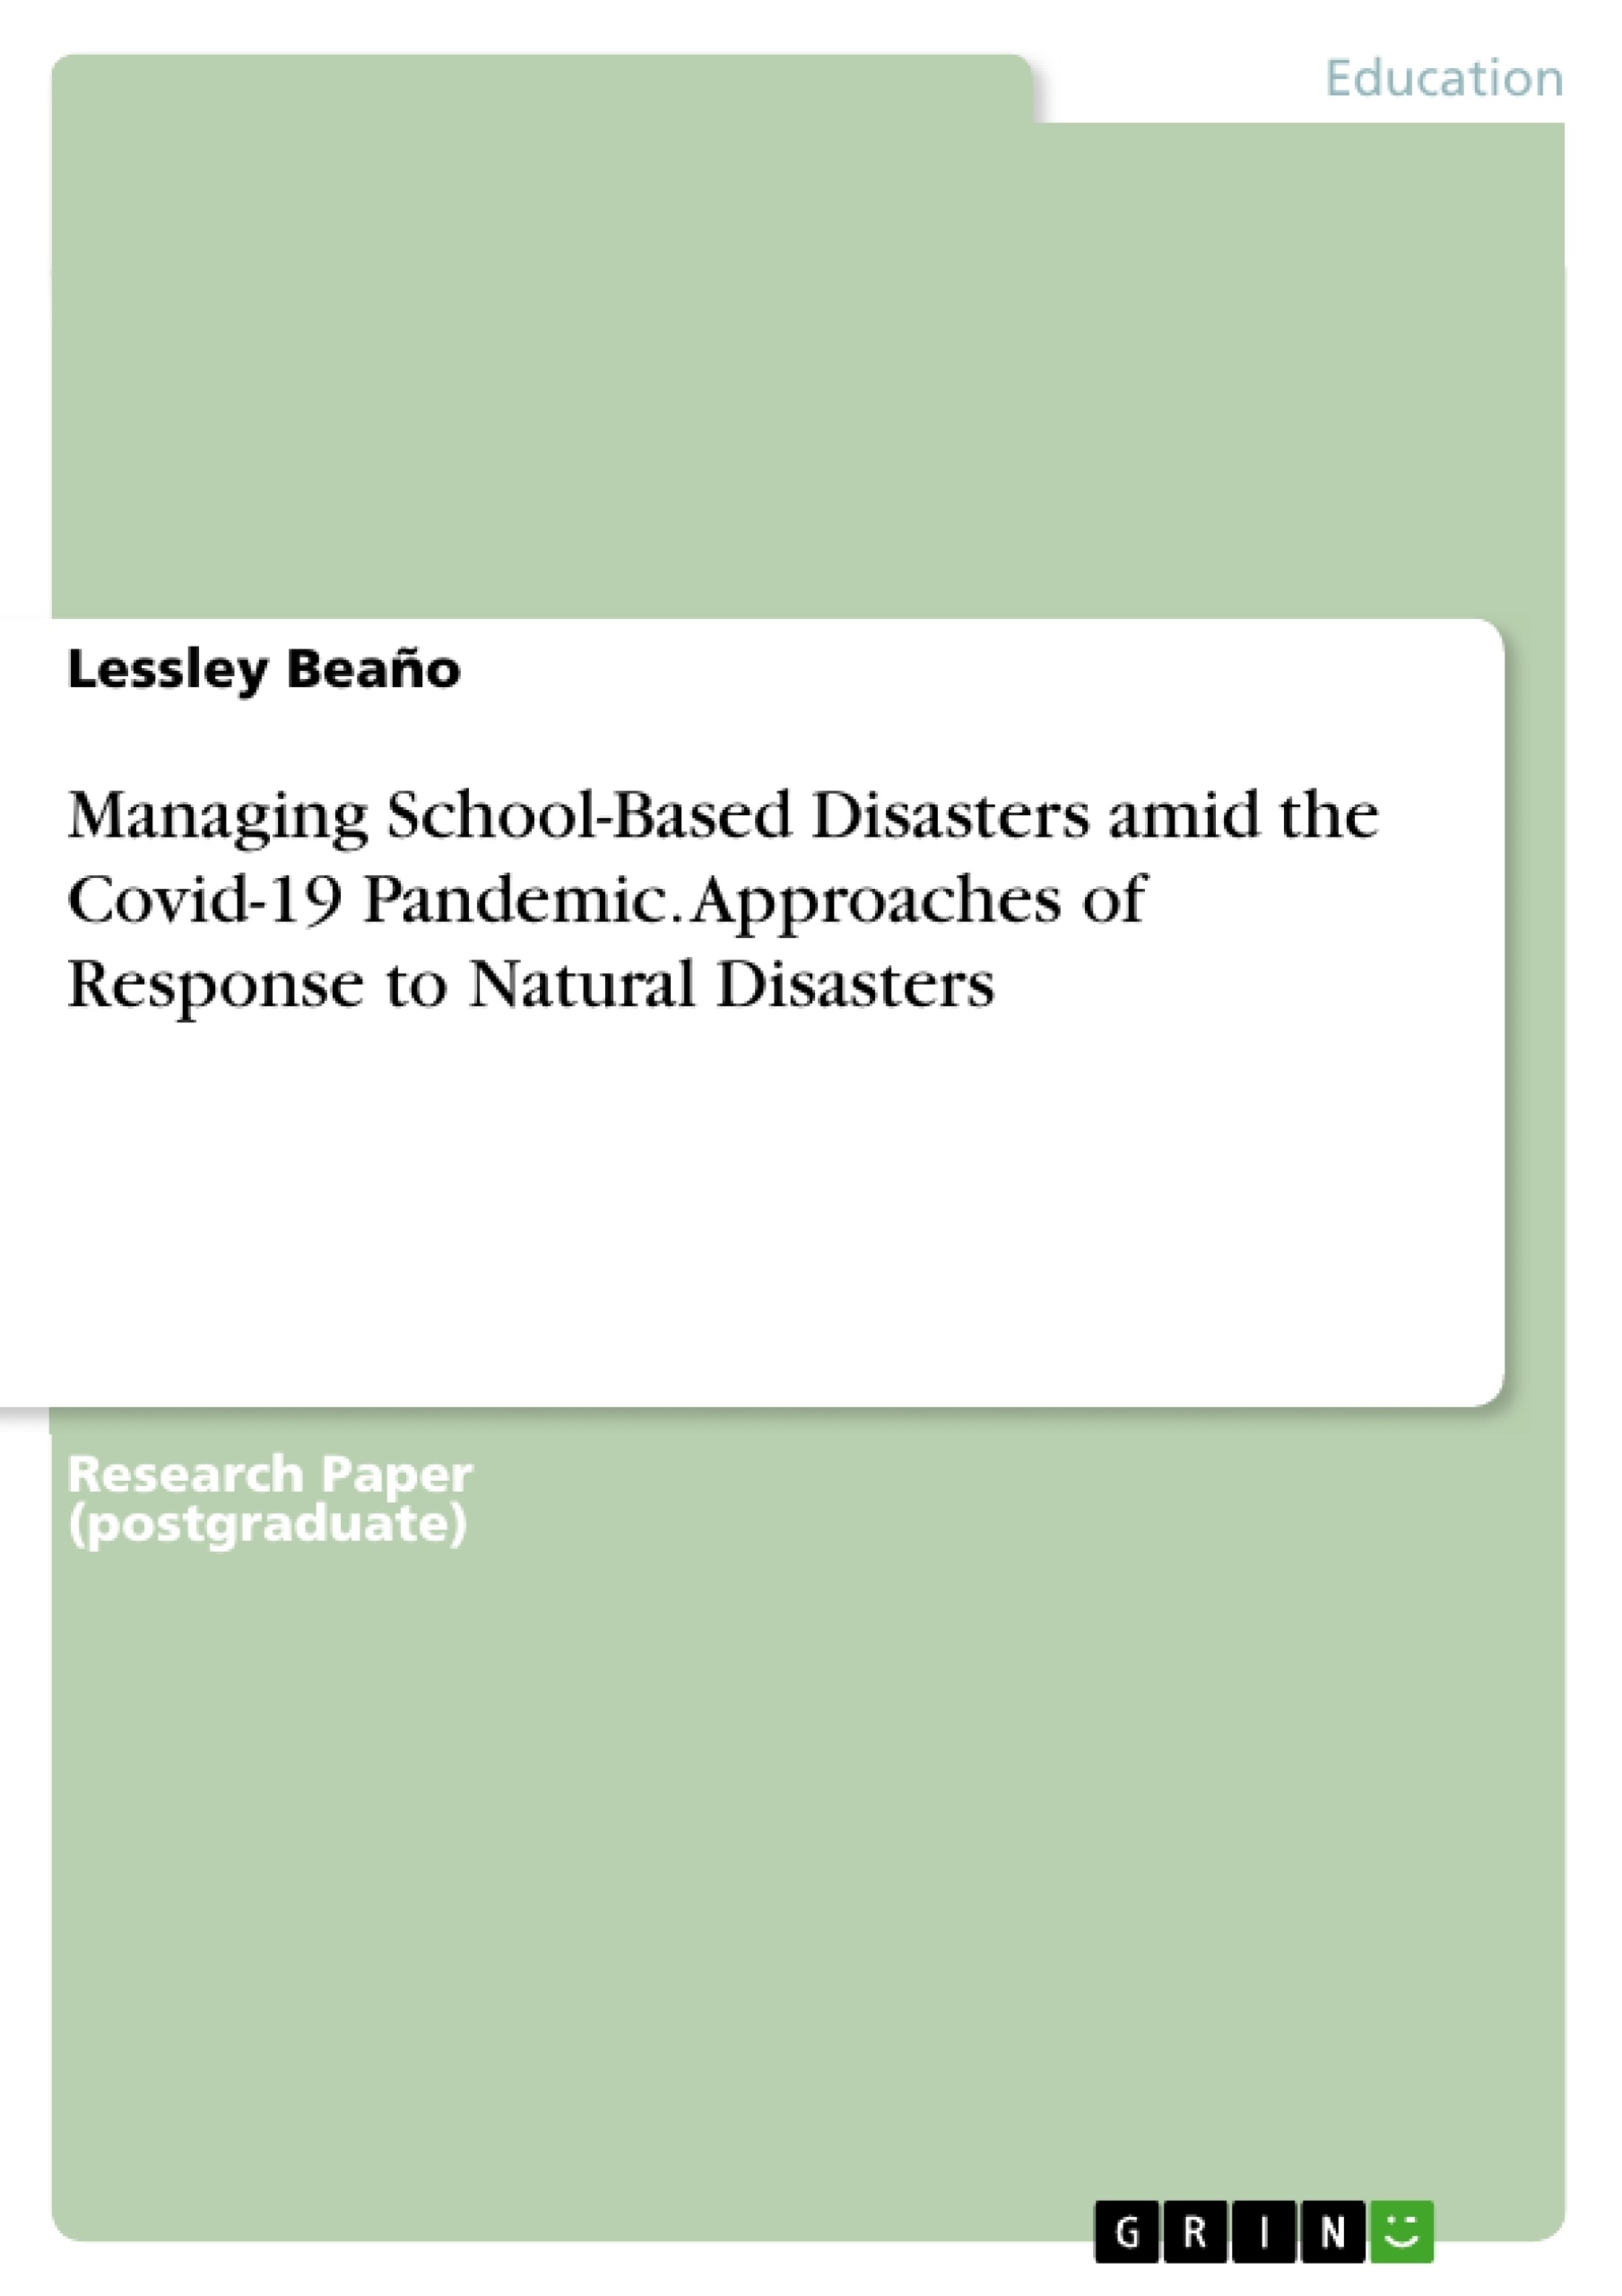 Título: Managing School-Based Disasters amid the Covid-19 Pandemic. Approaches of Response to Natural Disasters